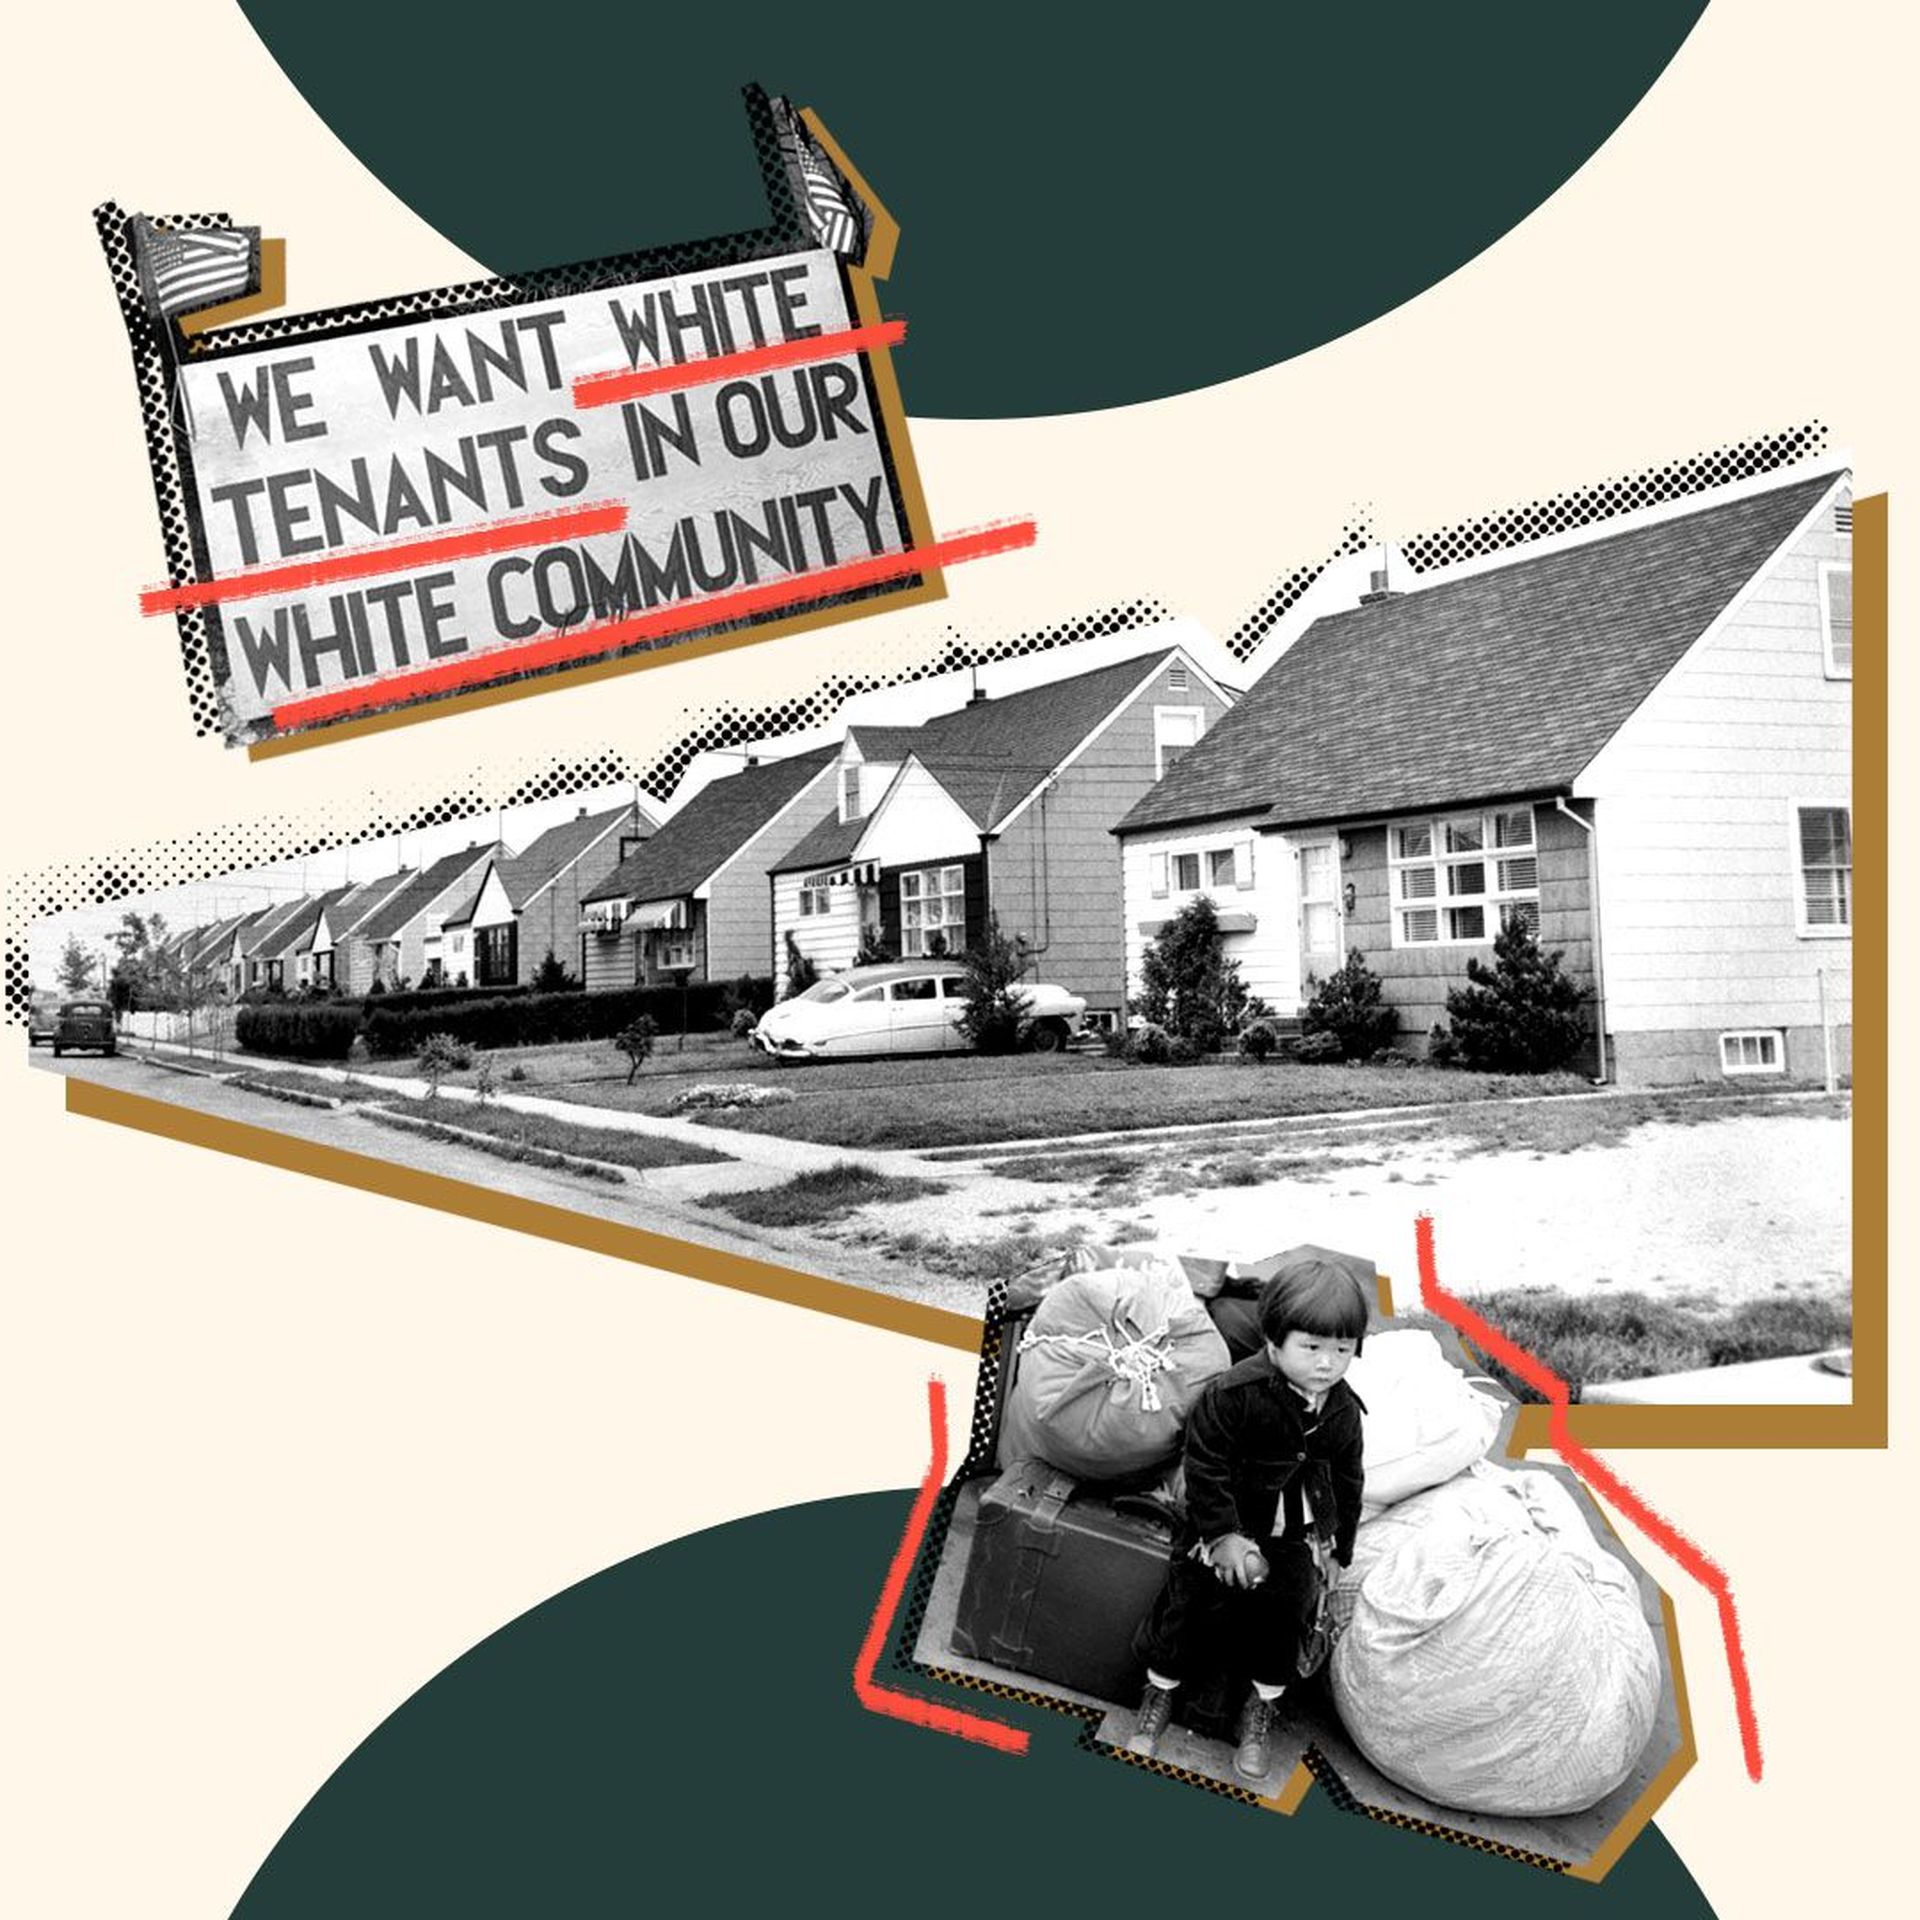 Photo illustration of a row of houses, a young child seated on a luggage, and a “We want White tenants in our White community” protest sign